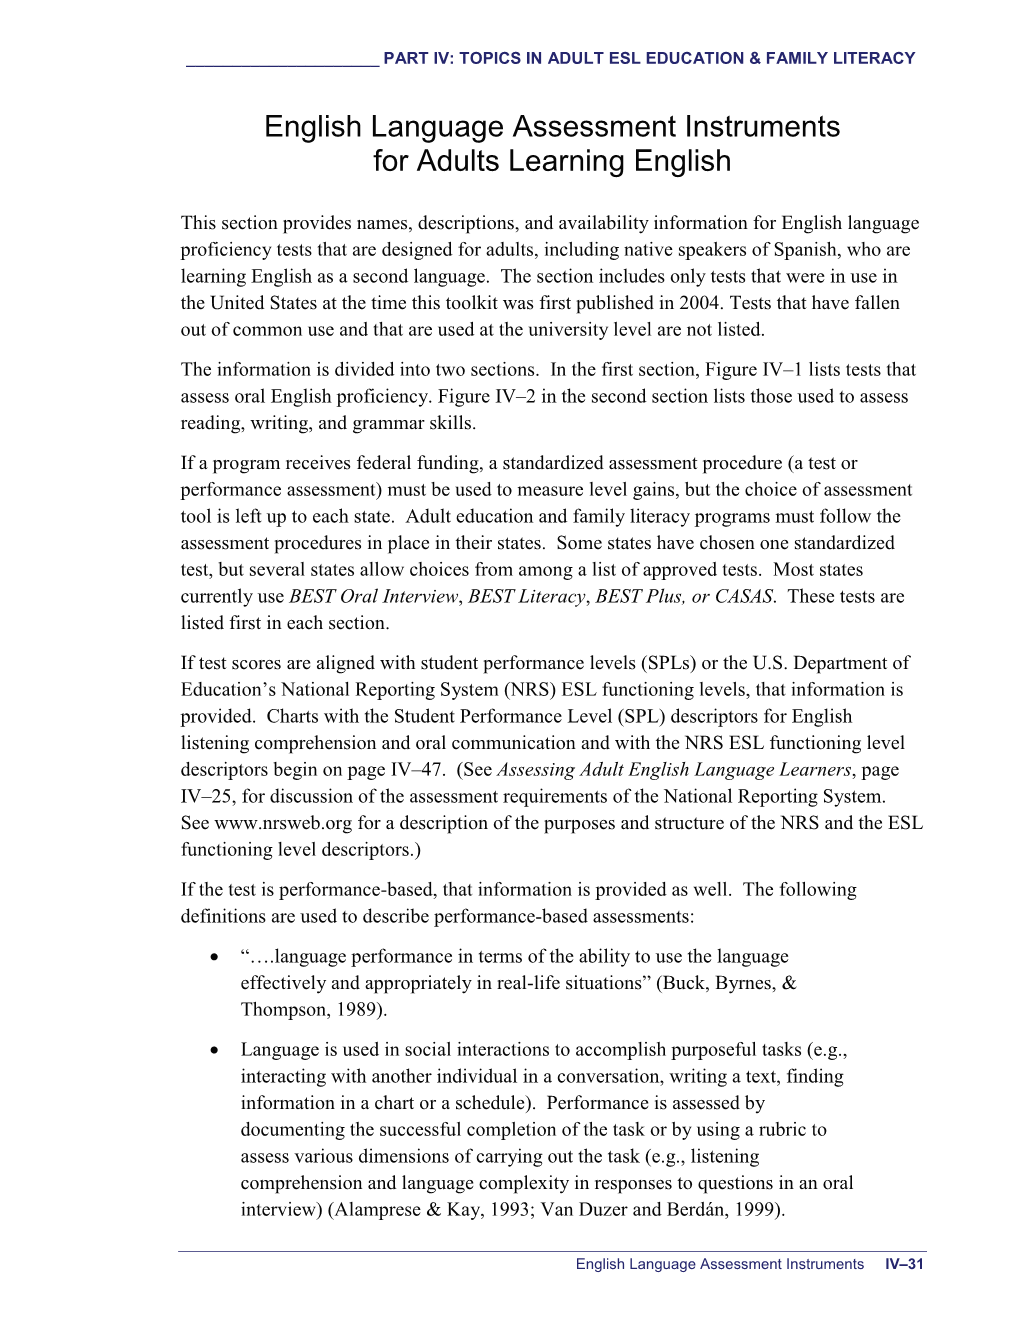 English Language Assessment Instruments for Adults Learning English